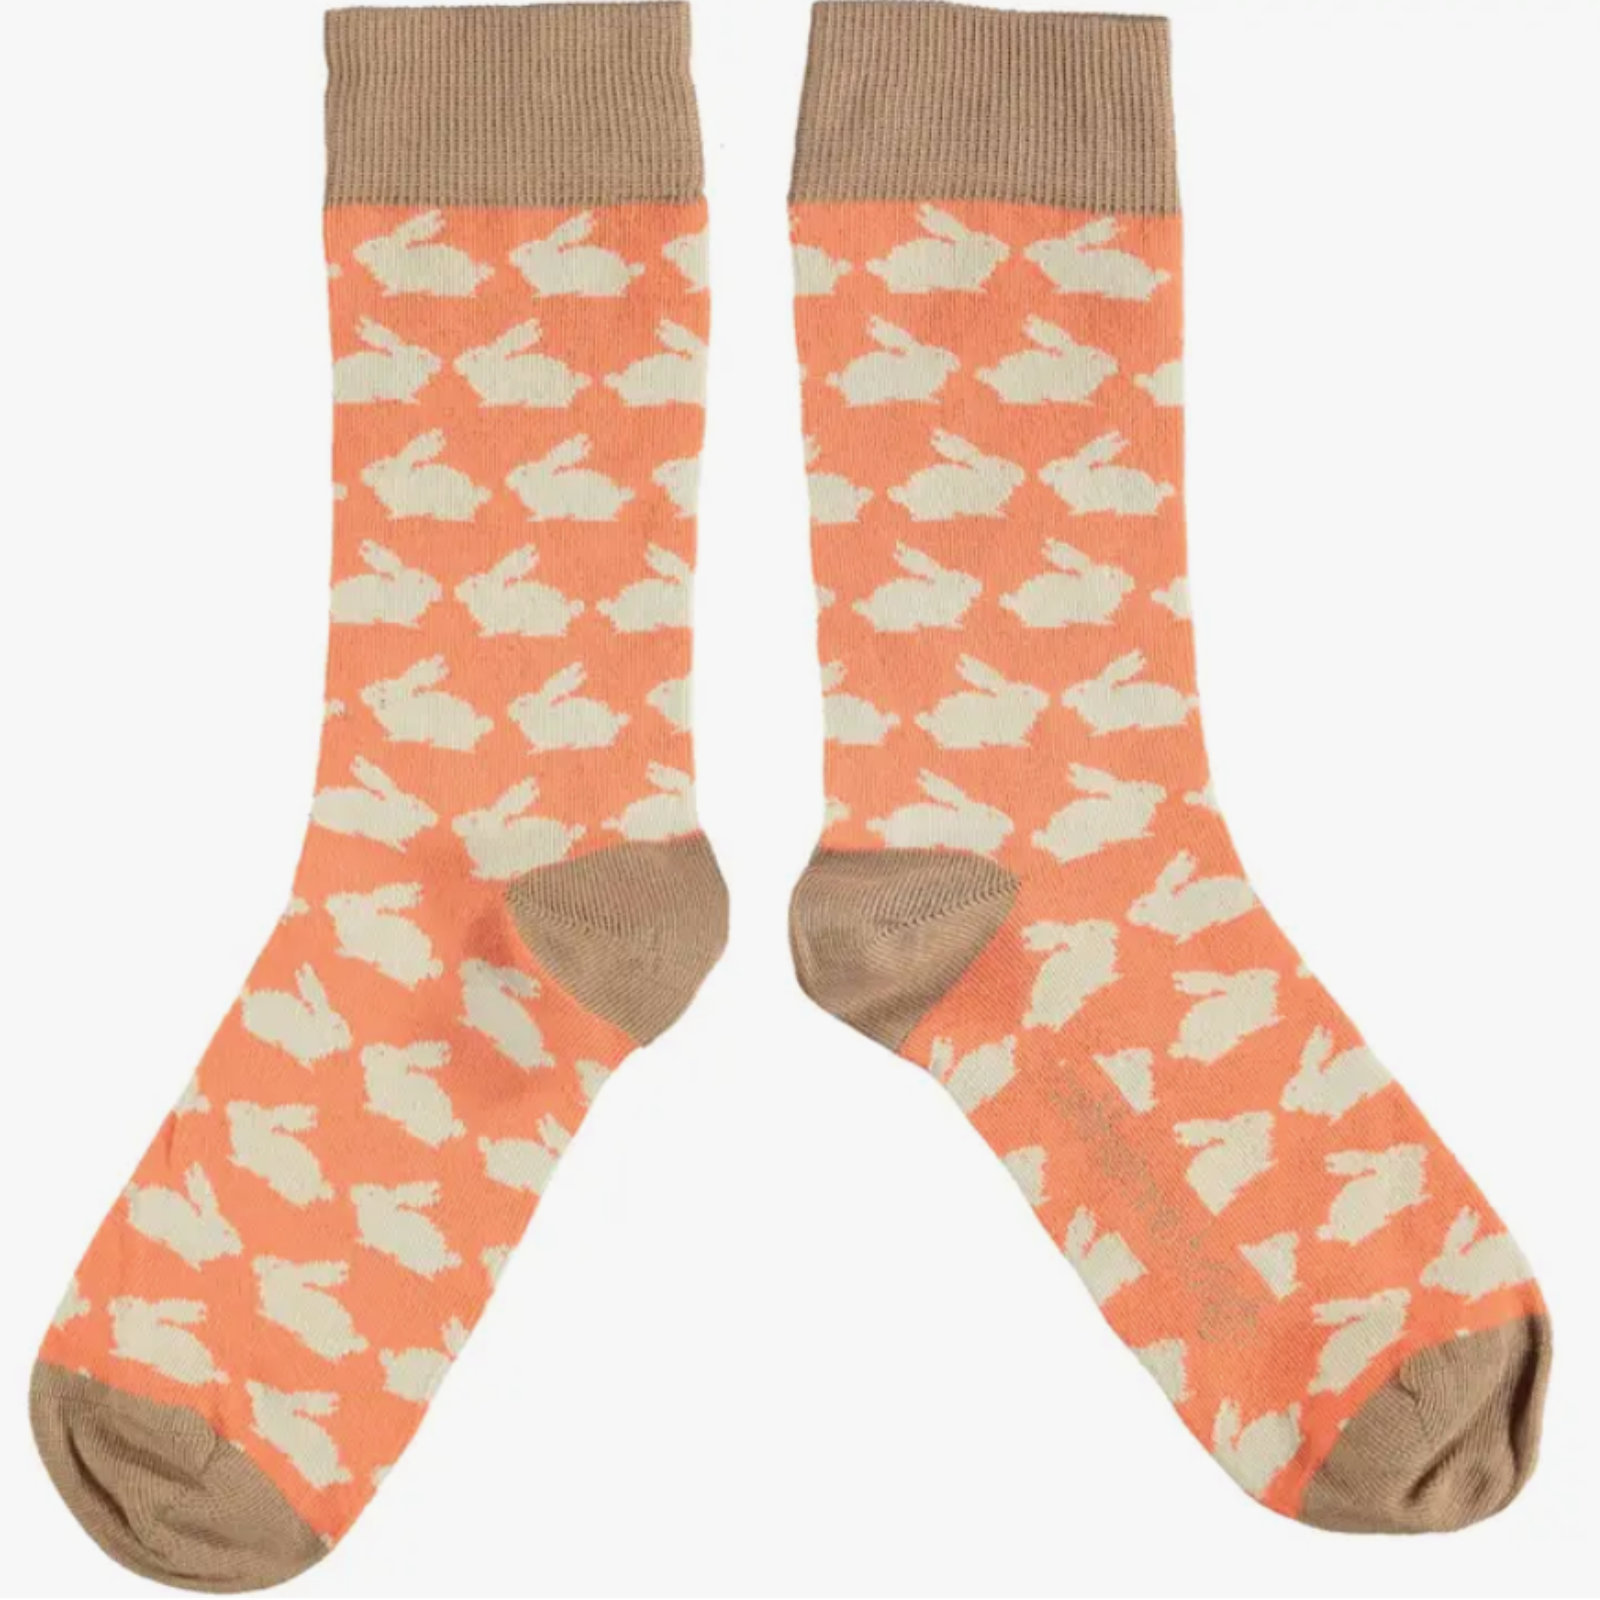 Catherine Tough Rabbit cotton women's crew socks with white rabbit silhouettes on a peach background with brown cuff, heel and toe